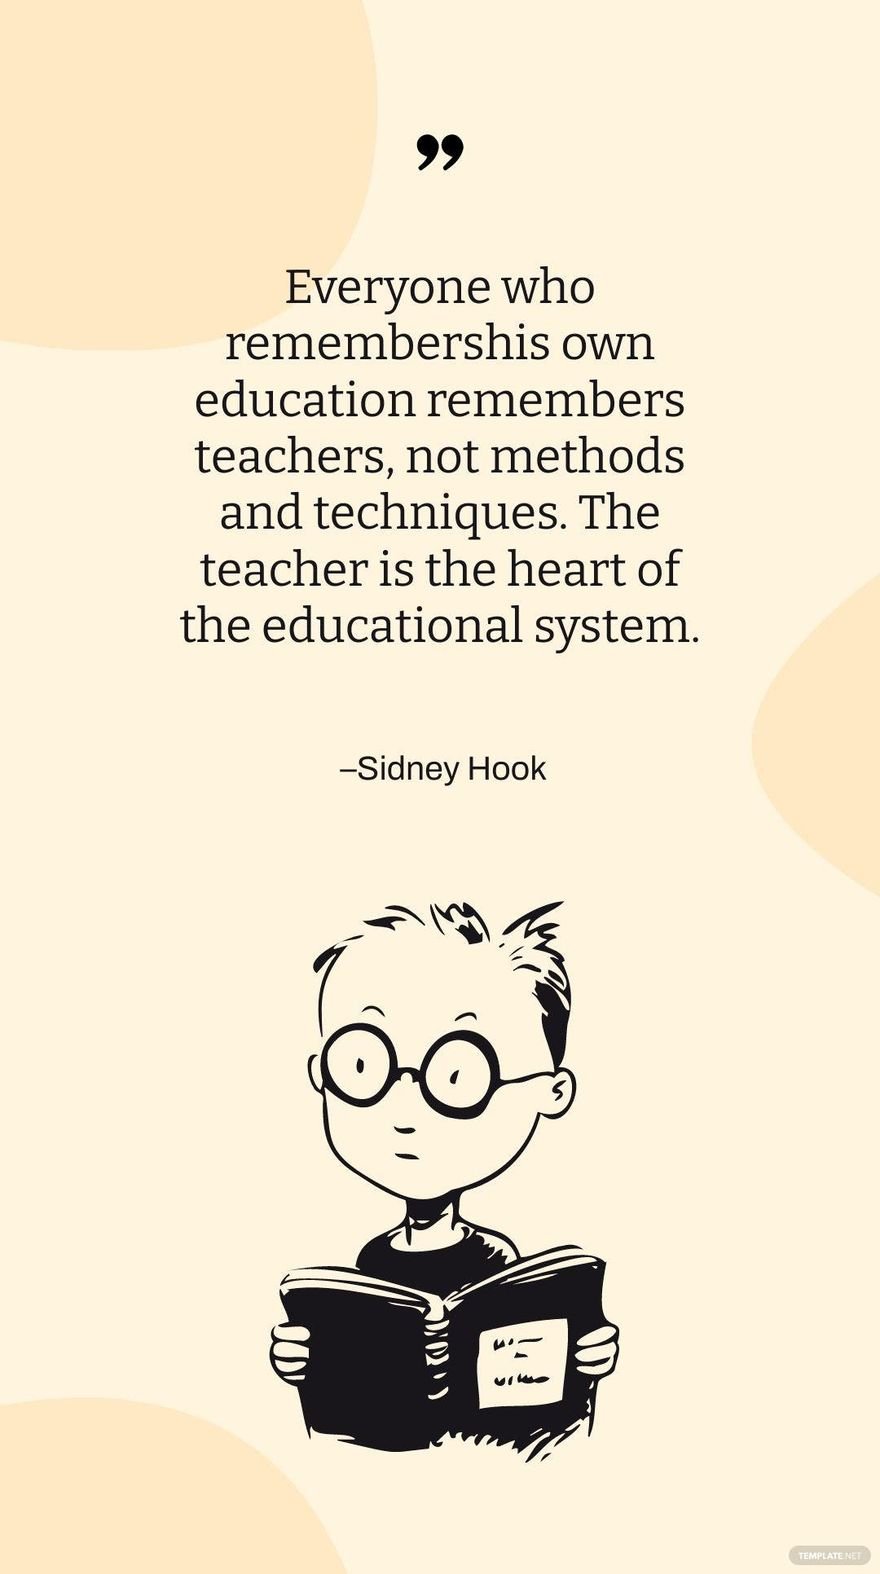 Free Sidney Hook - Everyone who remembers his own education remembers teachers, not methods and techniques. The teacher is the heart of the educational system.